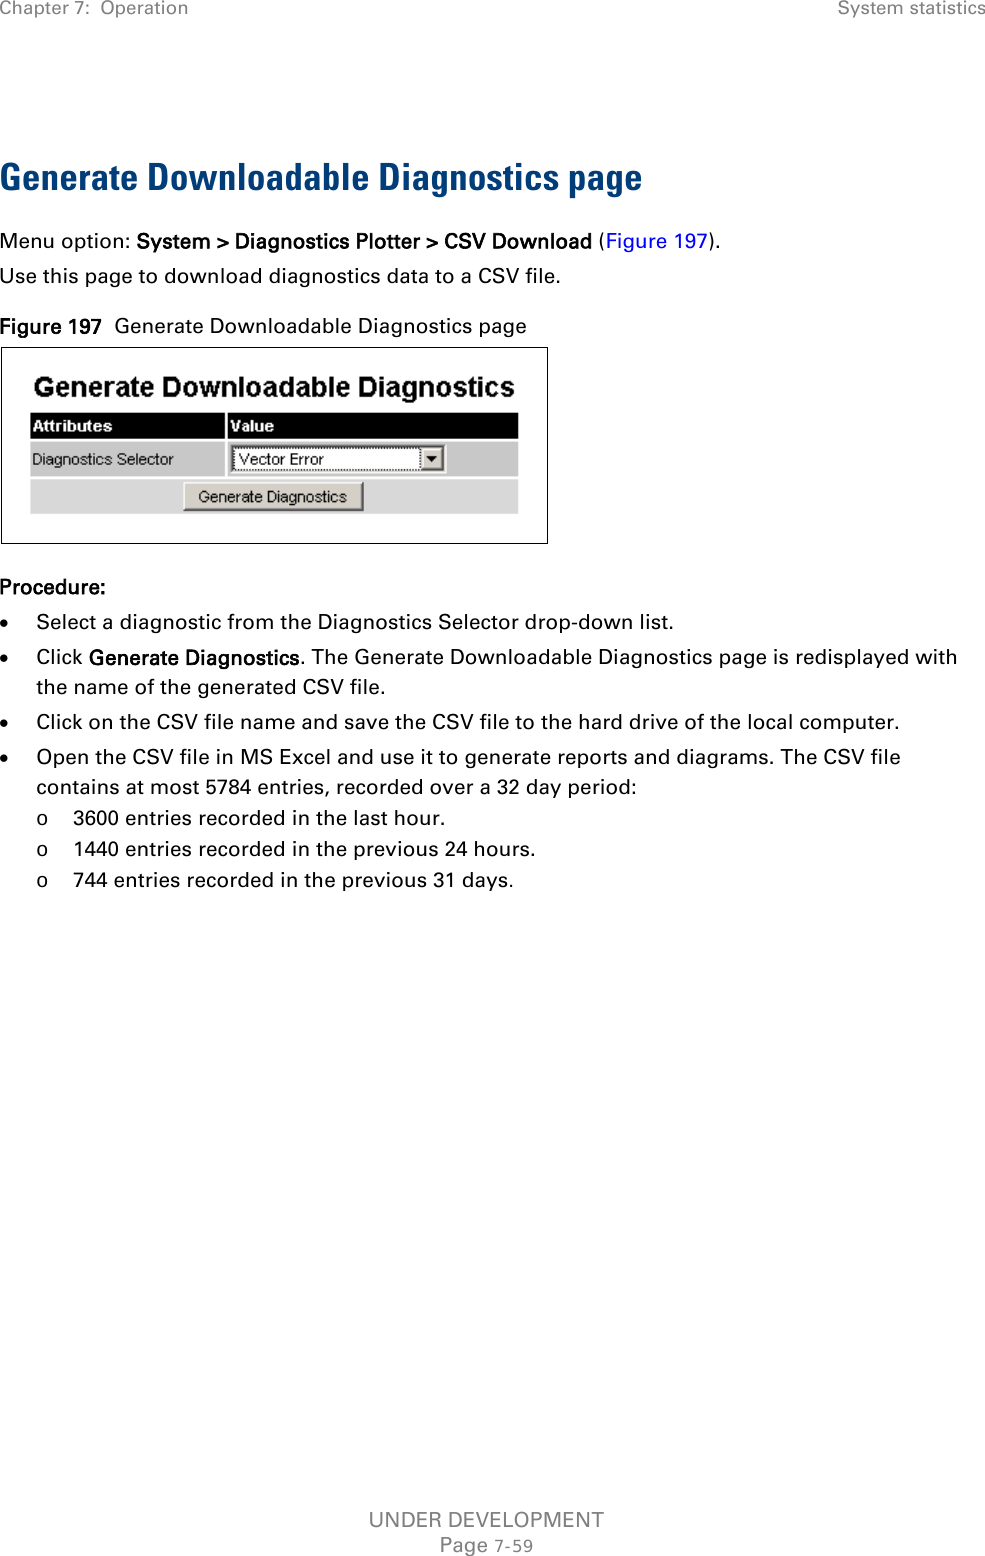 Chapter 7:  Operation System statistics   Generate Downloadable Diagnostics page Menu option: System &gt; Diagnostics Plotter &gt; CSV Download (Figure 197). Use this page to download diagnostics data to a CSV file. Figure 197  Generate Downloadable Diagnostics page  Procedure: • Select a diagnostic from the Diagnostics Selector drop-down list. • Click Generate Diagnostics. The Generate Downloadable Diagnostics page is redisplayed with the name of the generated CSV file. • Click on the CSV file name and save the CSV file to the hard drive of the local computer. • Open the CSV file in MS Excel and use it to generate reports and diagrams. The CSV file contains at most 5784 entries, recorded over a 32 day period: o 3600 entries recorded in the last hour. o 1440 entries recorded in the previous 24 hours. o 744 entries recorded in the previous 31 days.  UNDER DEVELOPMENT Page 7-59 